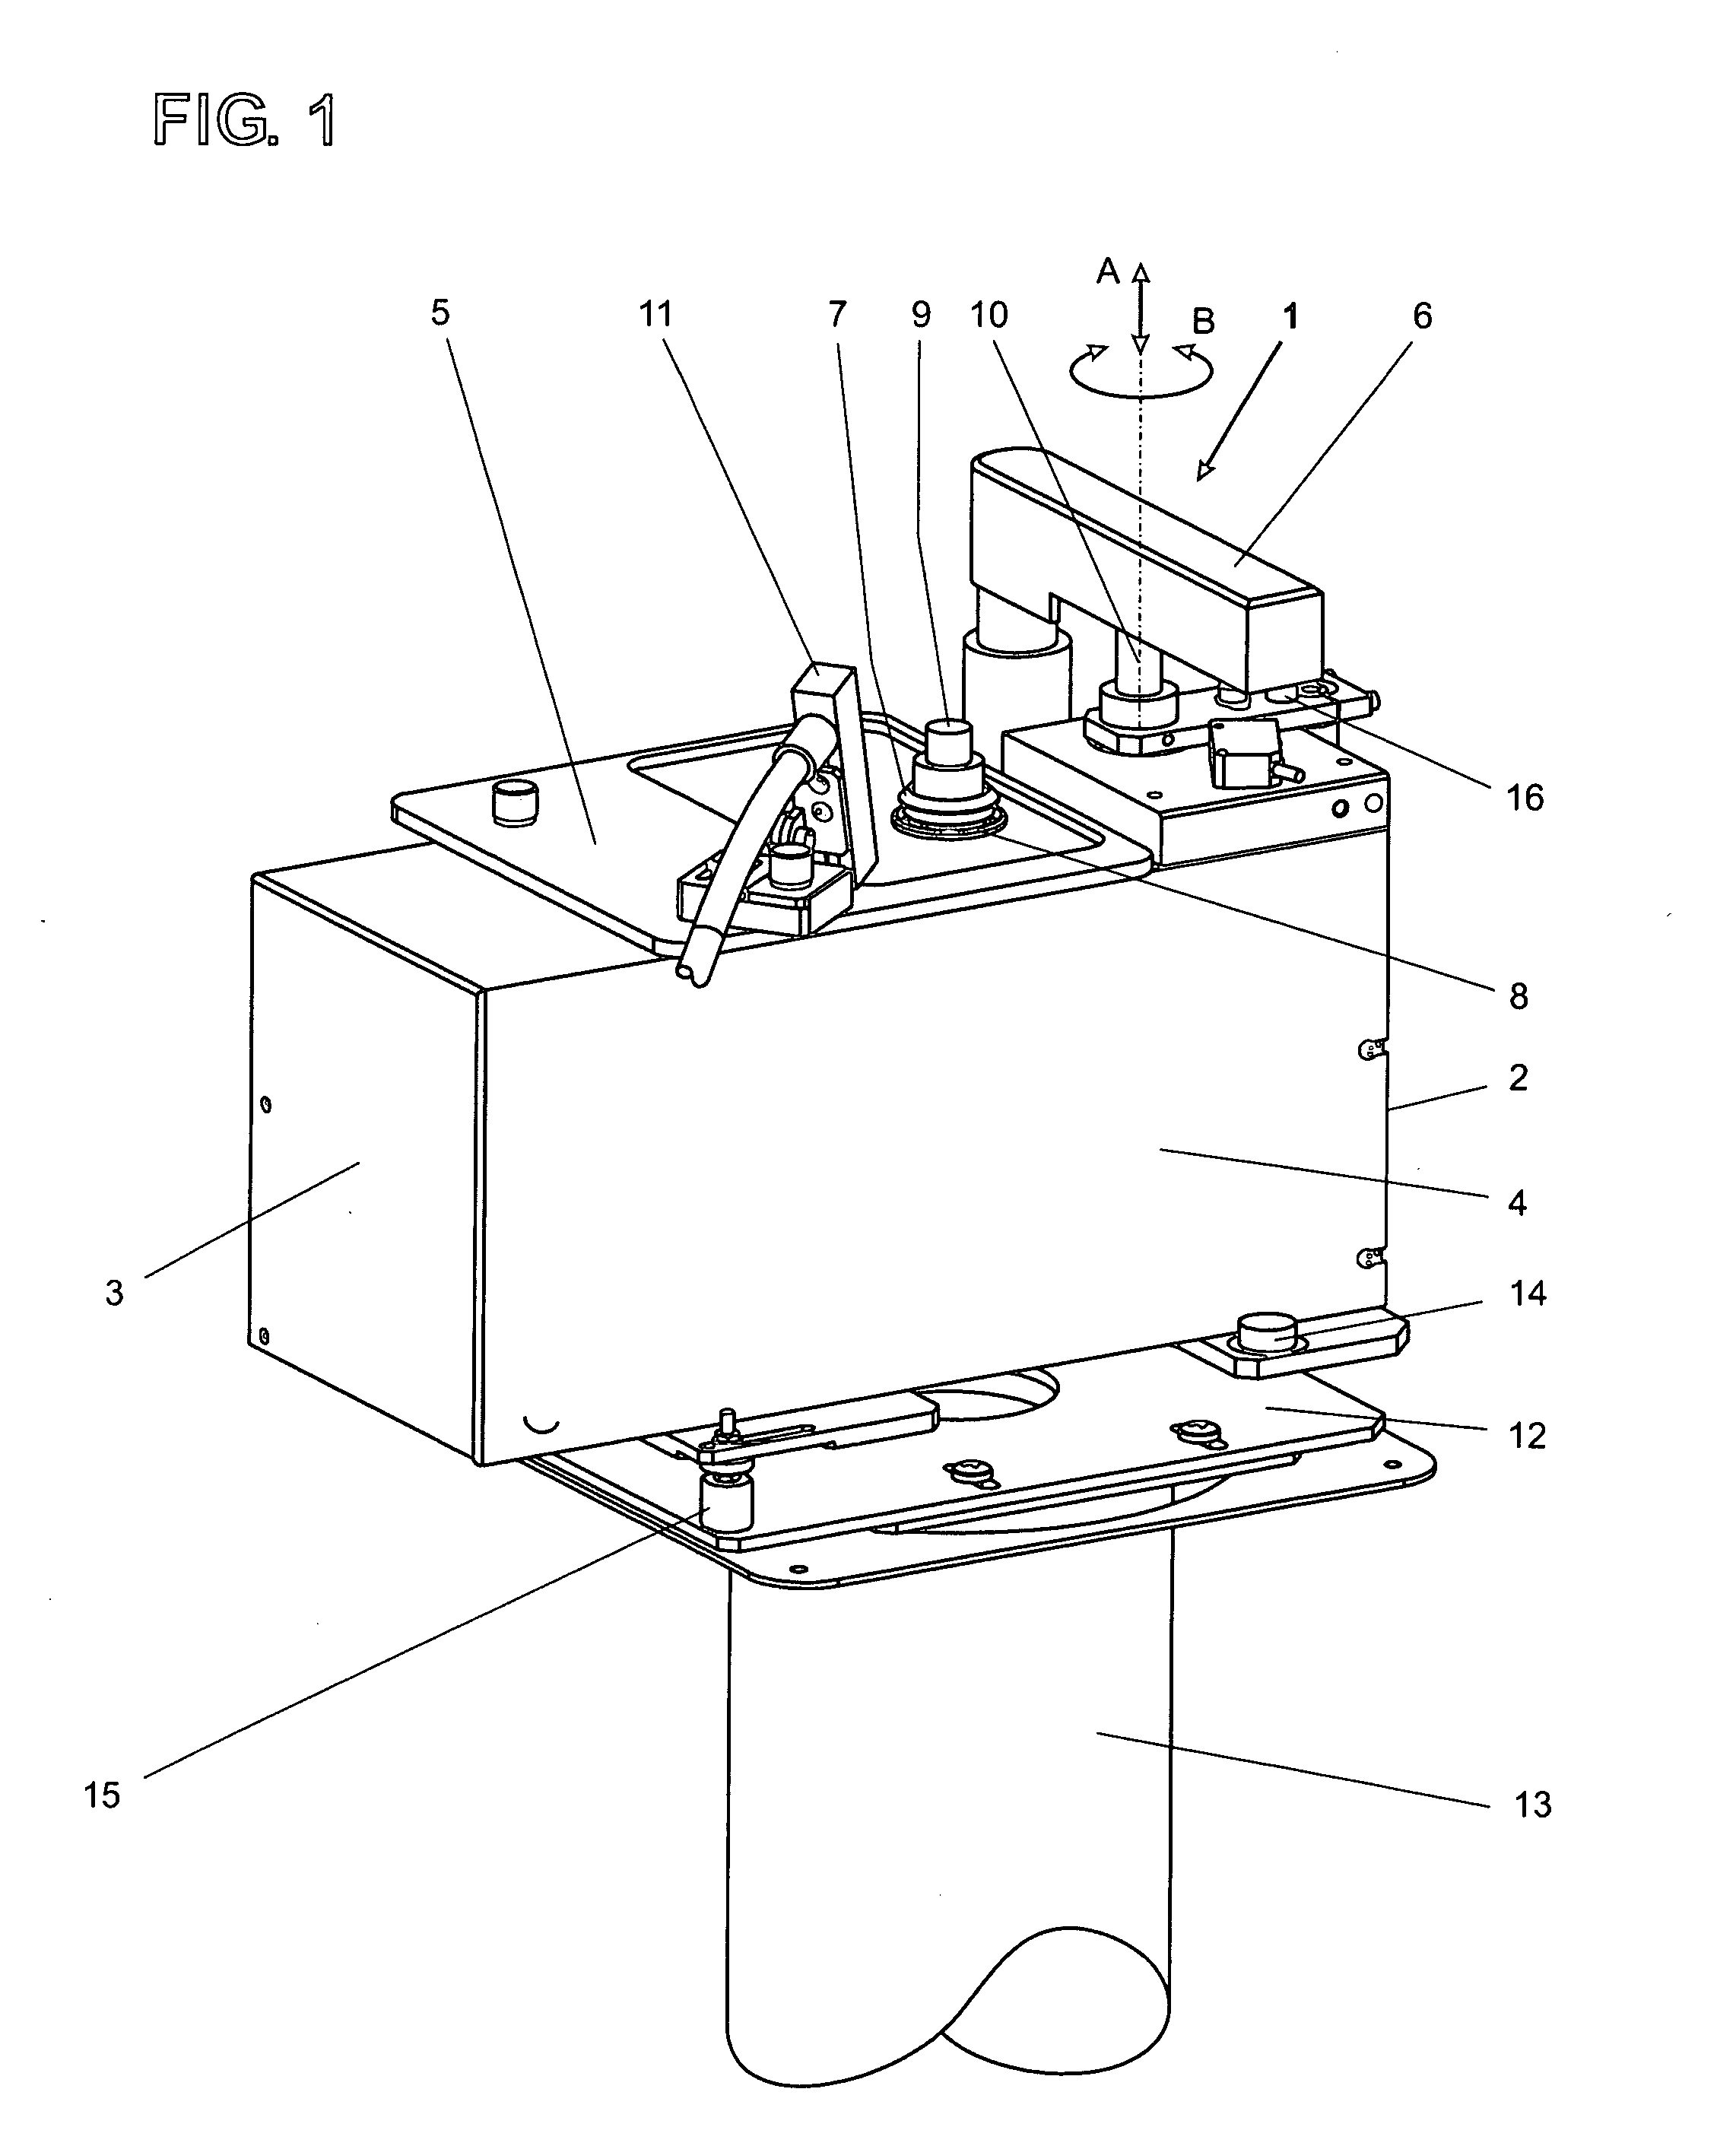 Apparatus and method for dispensing substances into containers